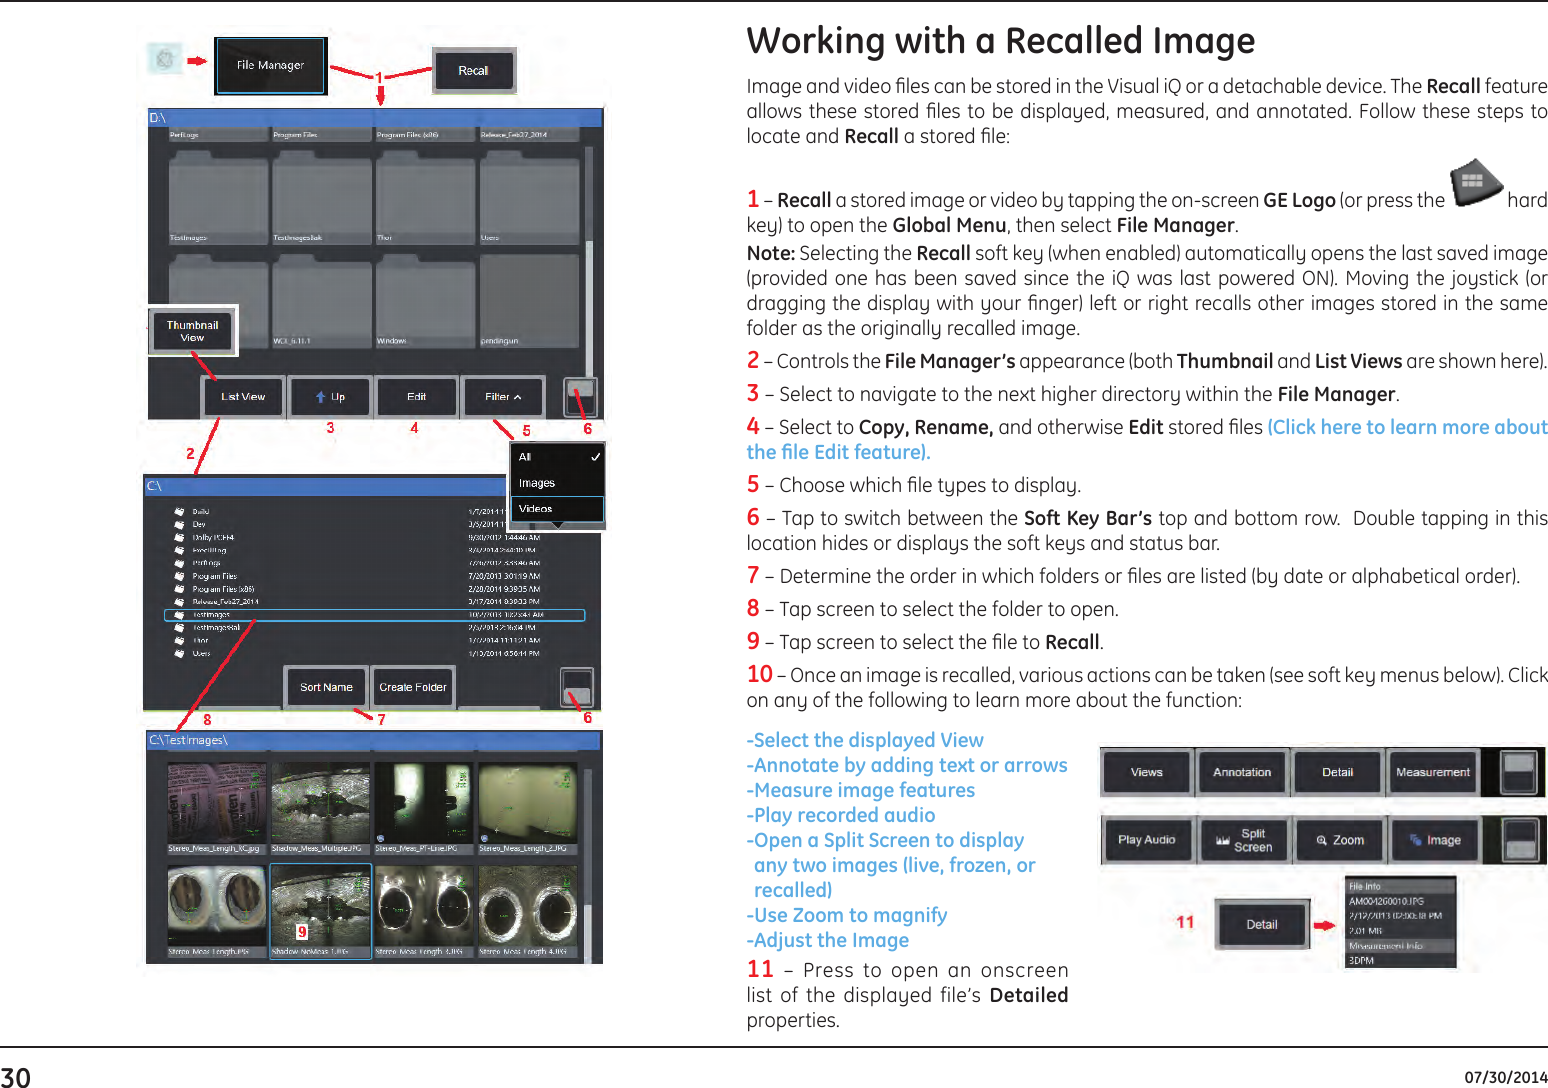 30 07/30/2014Working with a Recalled ImageImage and video les can be stored in the Visual iQ or a detachable device. The Recall feature allows these stored les to be displayed, measured, and annotated. Follow these steps to locate and Recall a stored le:1 – Recall a stored image or video by tapping the on-screen GE Logo (or press the   hard key) to open the Global Menu, then select File Manager.  Note: Selecting the Recall soft key (when enabled) automatically opens the last saved image (provided one has been saved since the iQ was last powered ON). Moving the joystick (or dragging the display with your nger) left or right recalls other images stored in the same folder as the originally recalled image.2 – Controls the File Manager’s appearance (both Thumbnail and List Views are shown here). 3 – Select to navigate to the next higher directory within the File Manager.4 – Select to Copy, Rename, and otherwise Edit stored les (Click here to learn more about theleEditfeature).5 – Choose which le types to display.  6 – Tap to switch between the Soft Key Bar’s top and bottom row.  Double tapping in this location hides or displays the soft keys and status bar.7 – Determine the order in which folders or les are listed (by date or alphabetical order). 8 – Tap screen to select the folder to open.   9 – Tap screen to select the le to Recall.   10 – Once an image is recalled, various actions can be taken (see soft key menus below). Click on any of the following to learn more about the function:-Select the displayed View - Annotate by adding text or arrows-Measure image features-Play recorded audio - Open a Split Screen to display any two images (live, frozen, or recalled) - Use Zoom to magnify - Adjust  the  Image 11 – Press to open an onscreen list of the displayed file’s Detailed properties. 